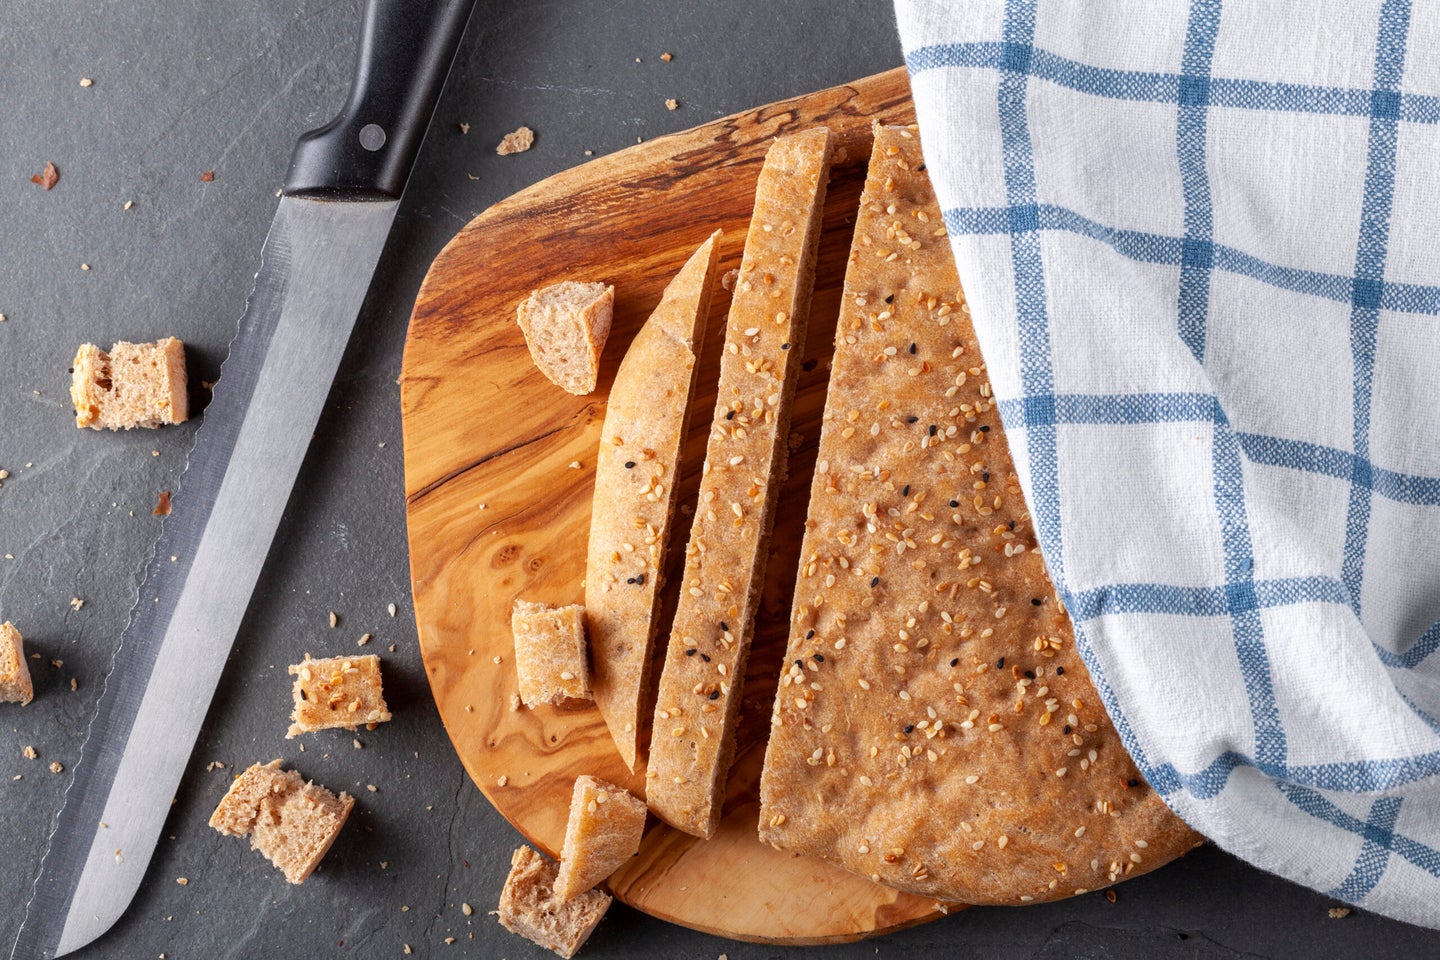 Flat lay image of Turkish Flat bread known as pide or pita on wooden chopping board. The wholegrain pita bread is round with poppy seeds and sesame seeds used as topping. It is diced and sliced